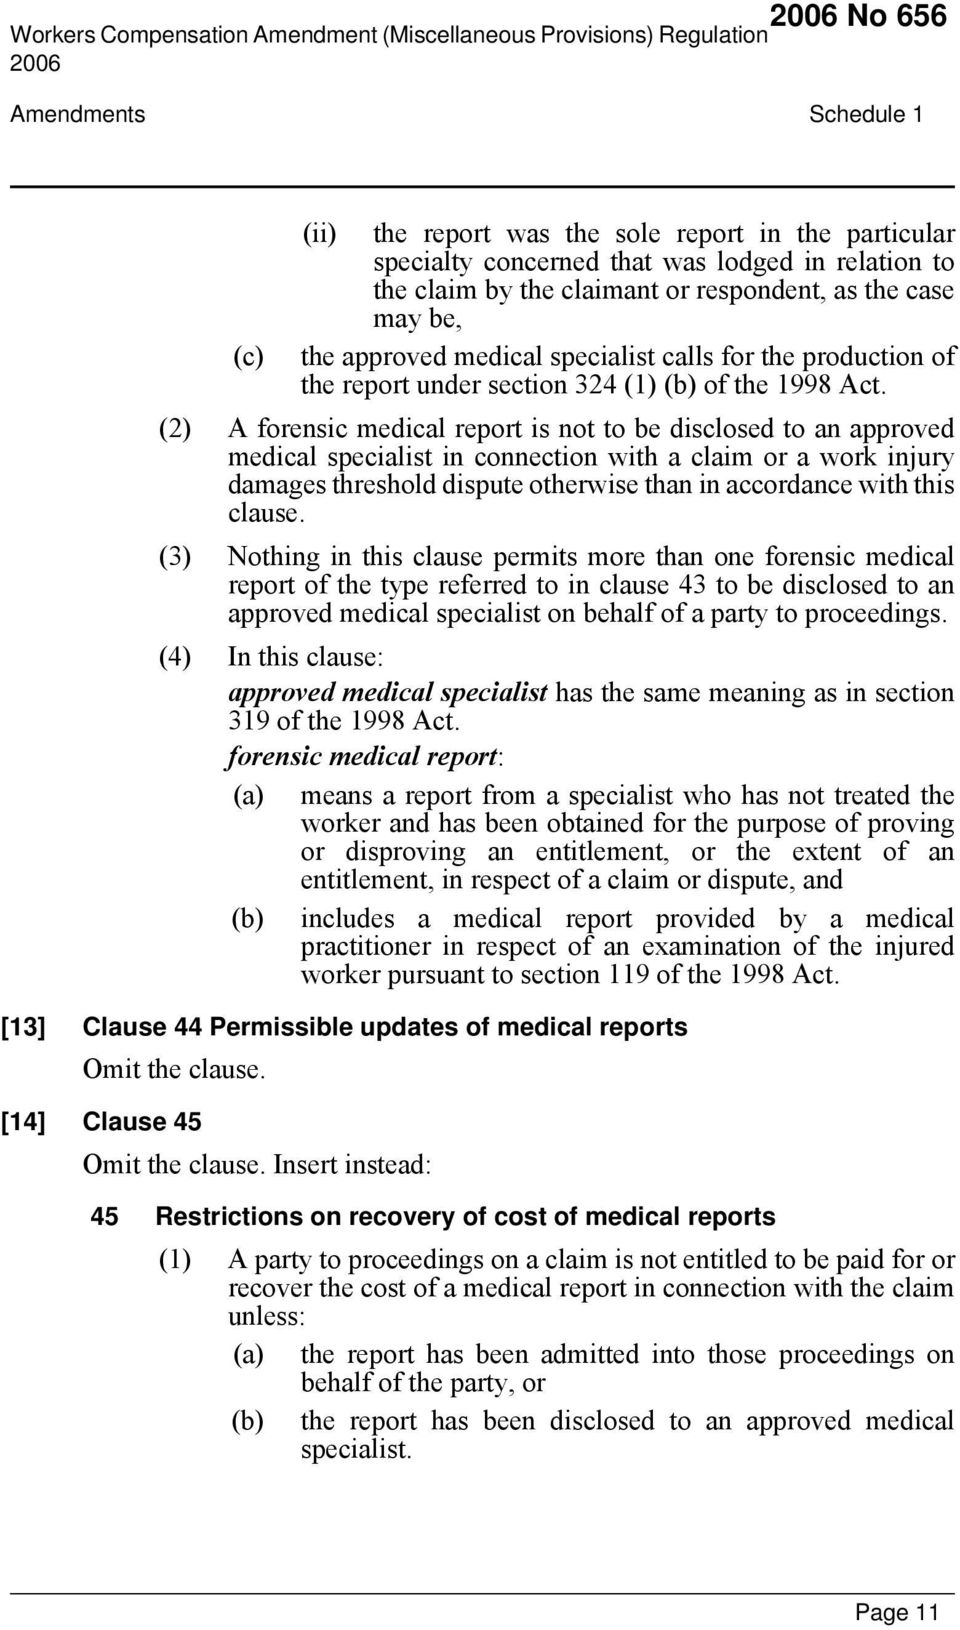 (2) A forensic medical report is not to be disclosed to an approved medical specialist in connection with a claim or a work injury damages threshold dispute otherwise than in accordance with this